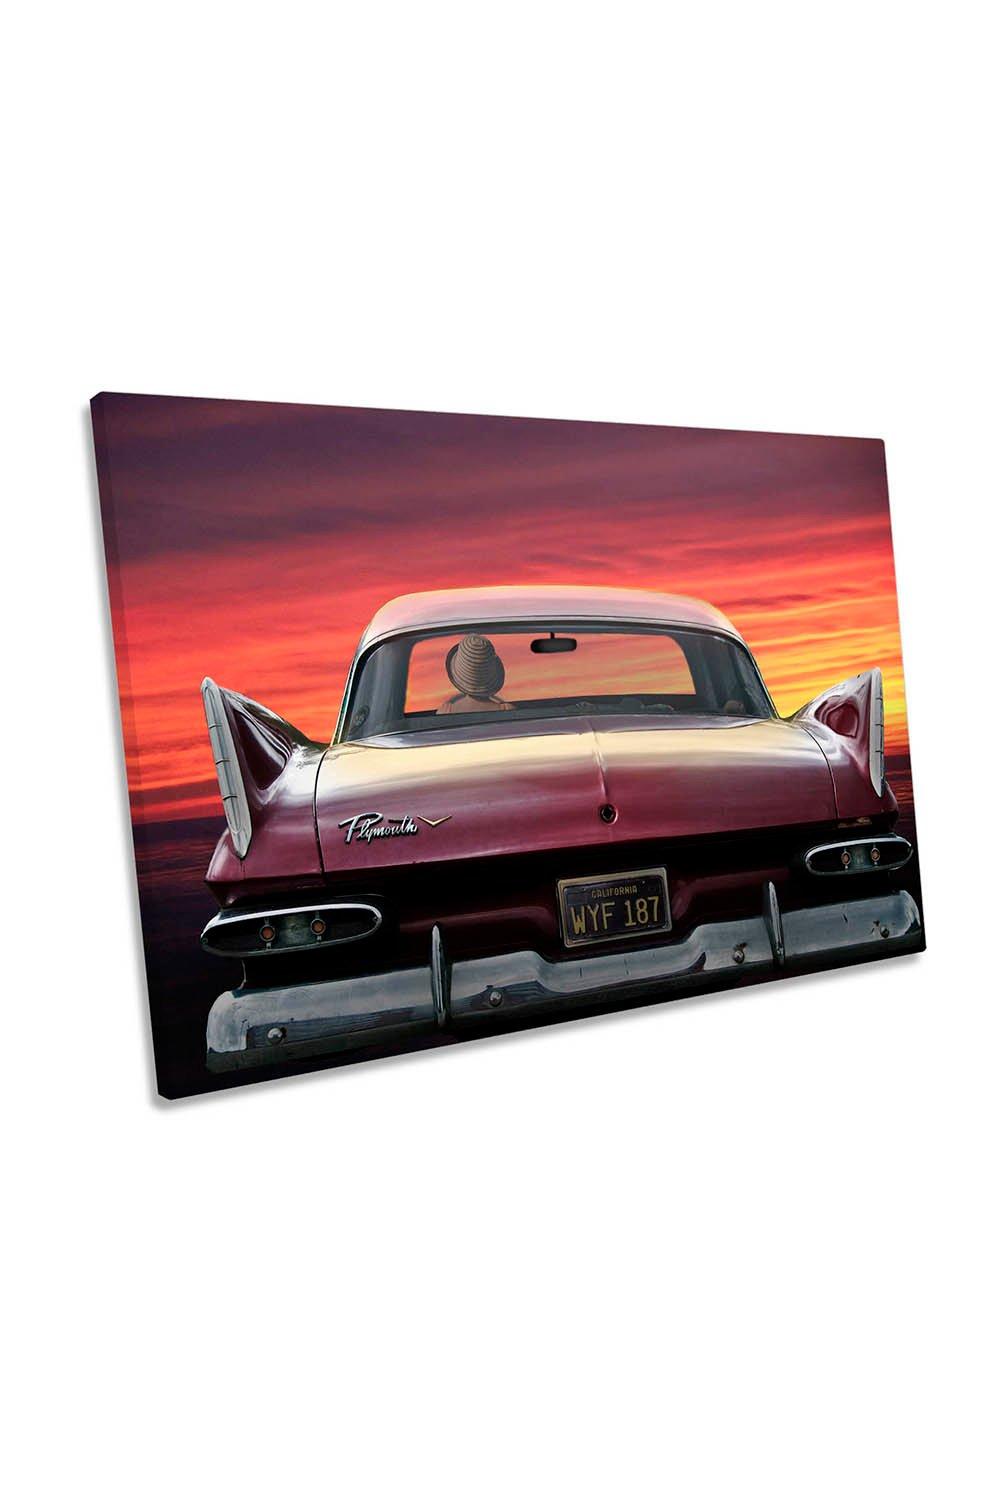 Plymouth Savoy Classic Car Sunset Canvas Wall Art Picture Print